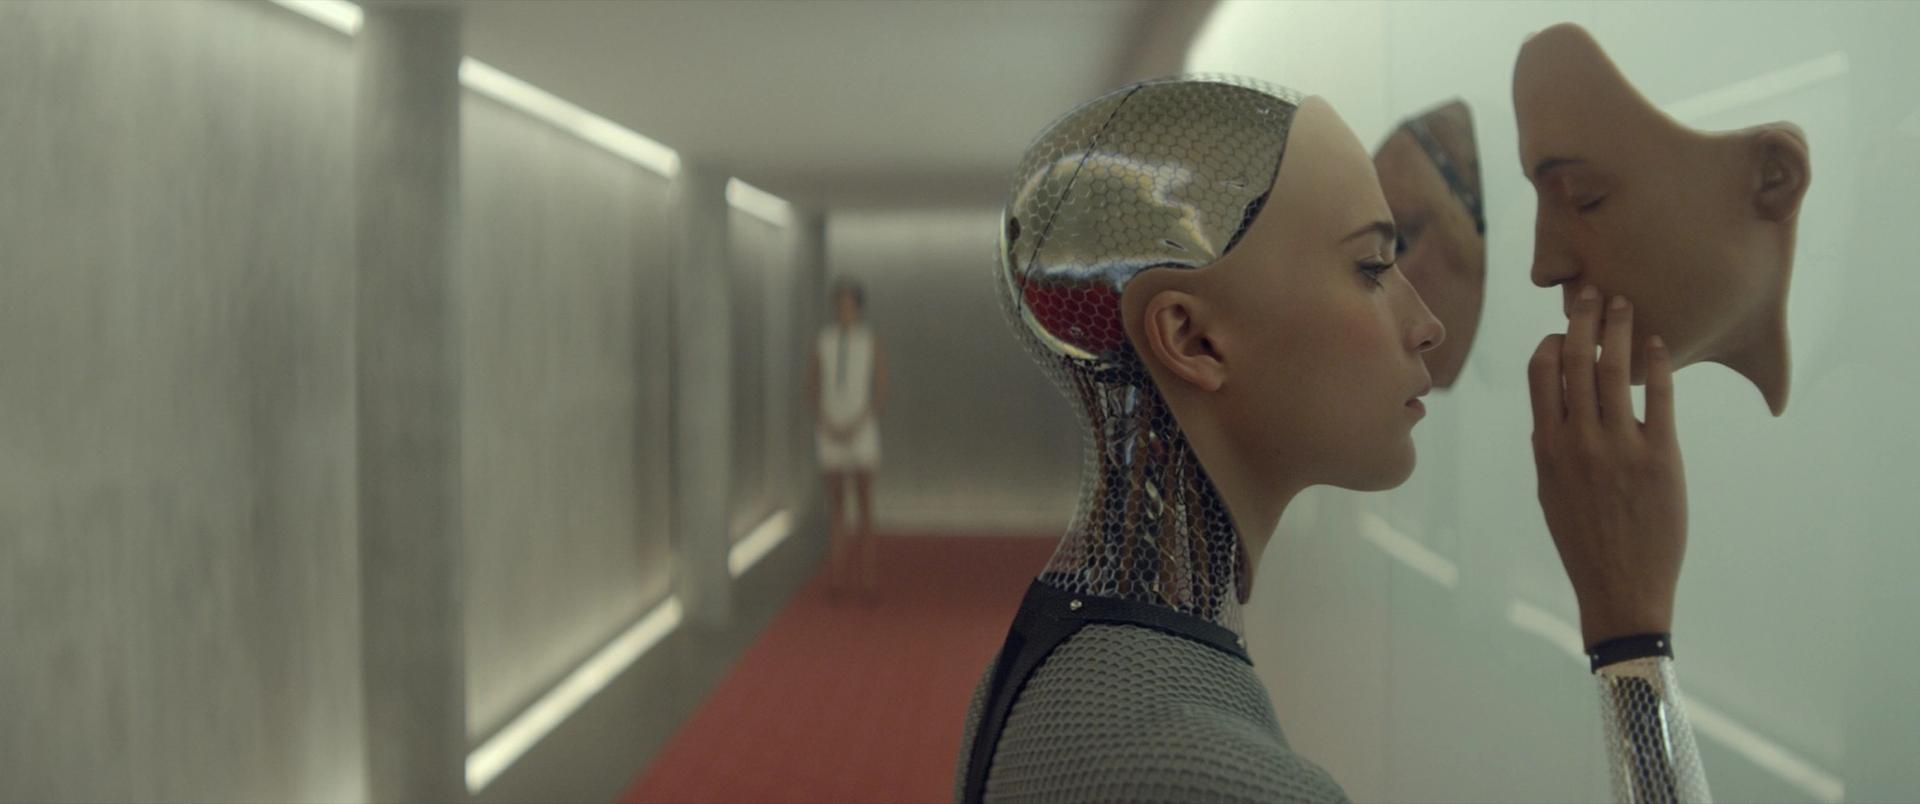 Shimmering, Twisted, Tangible: Meet the Sci Fi Cinematographer Behind Ex Machina